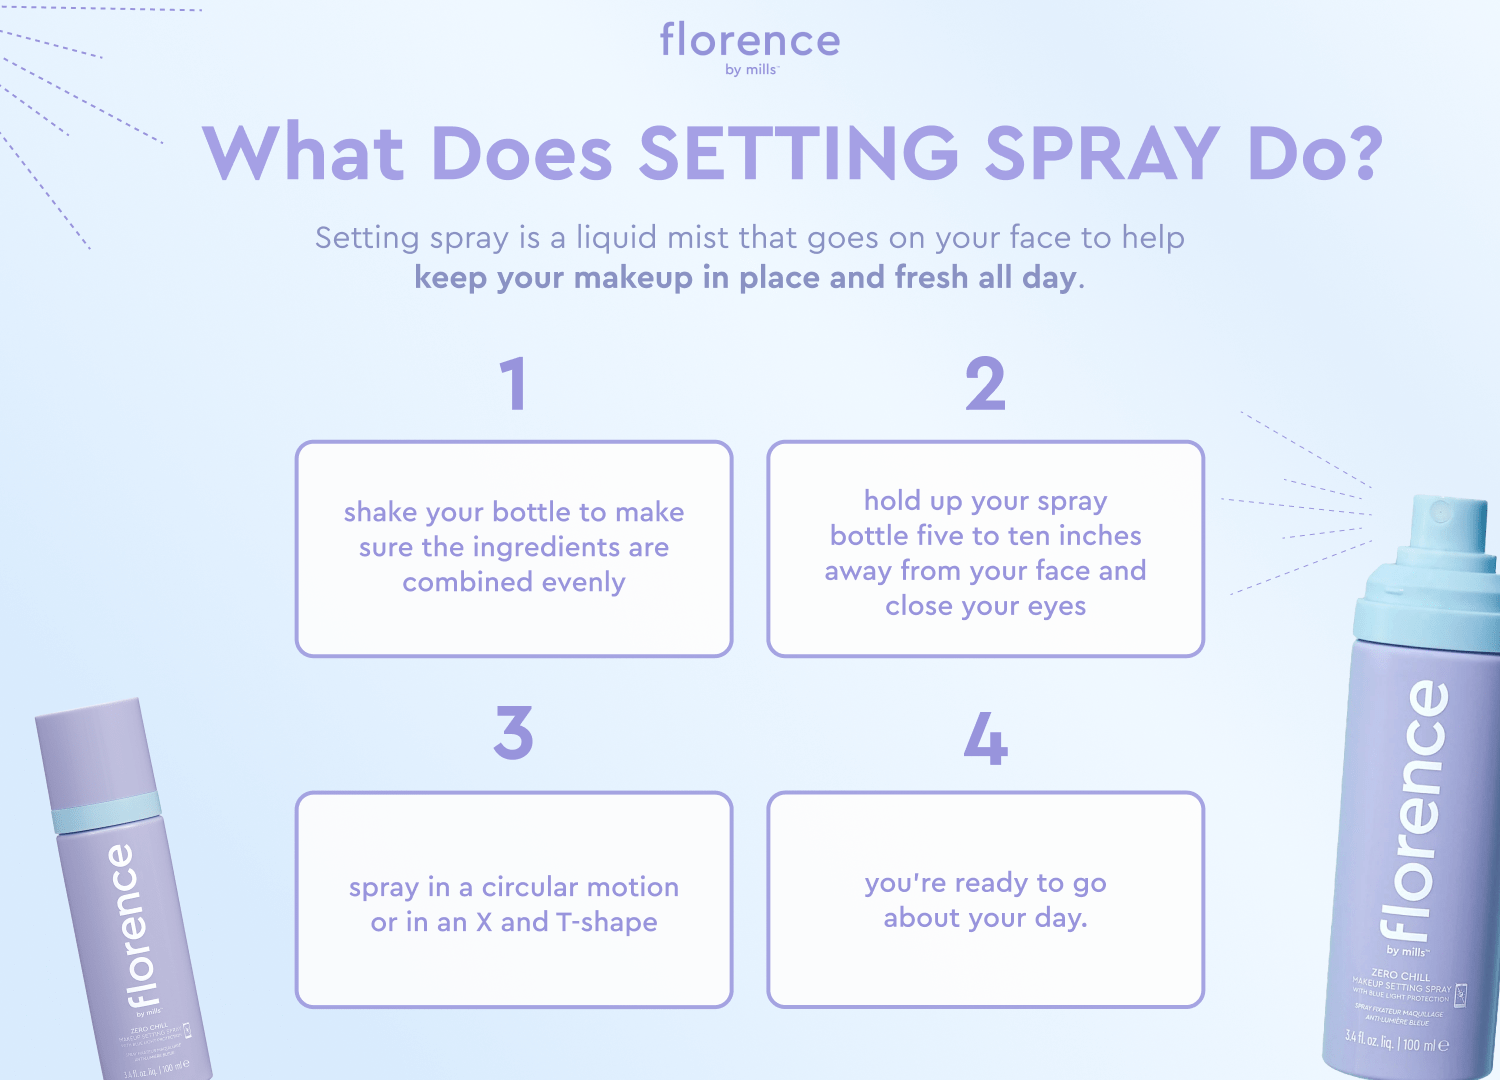 What does setting spray do by florence by mills